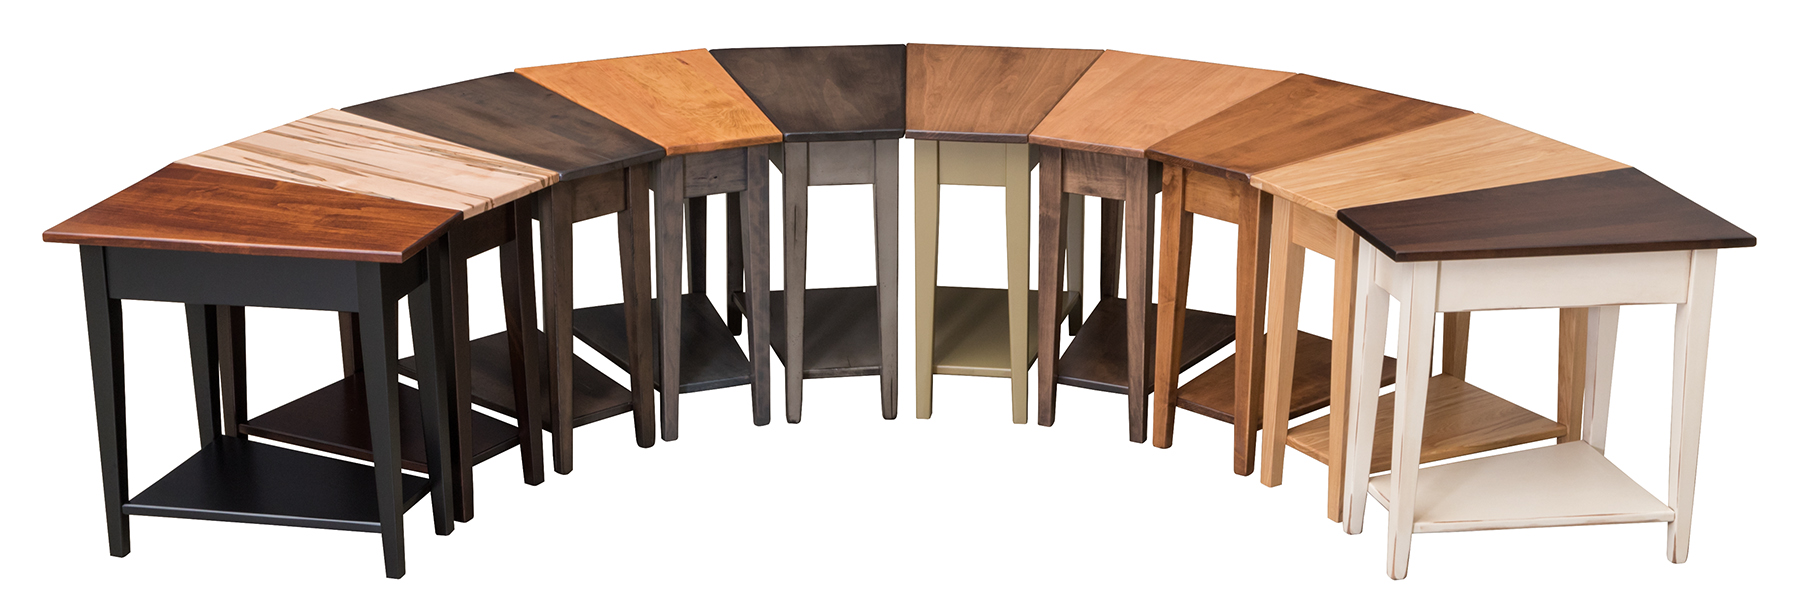 Shaker wedge accent tables showing two-tone stain combinations